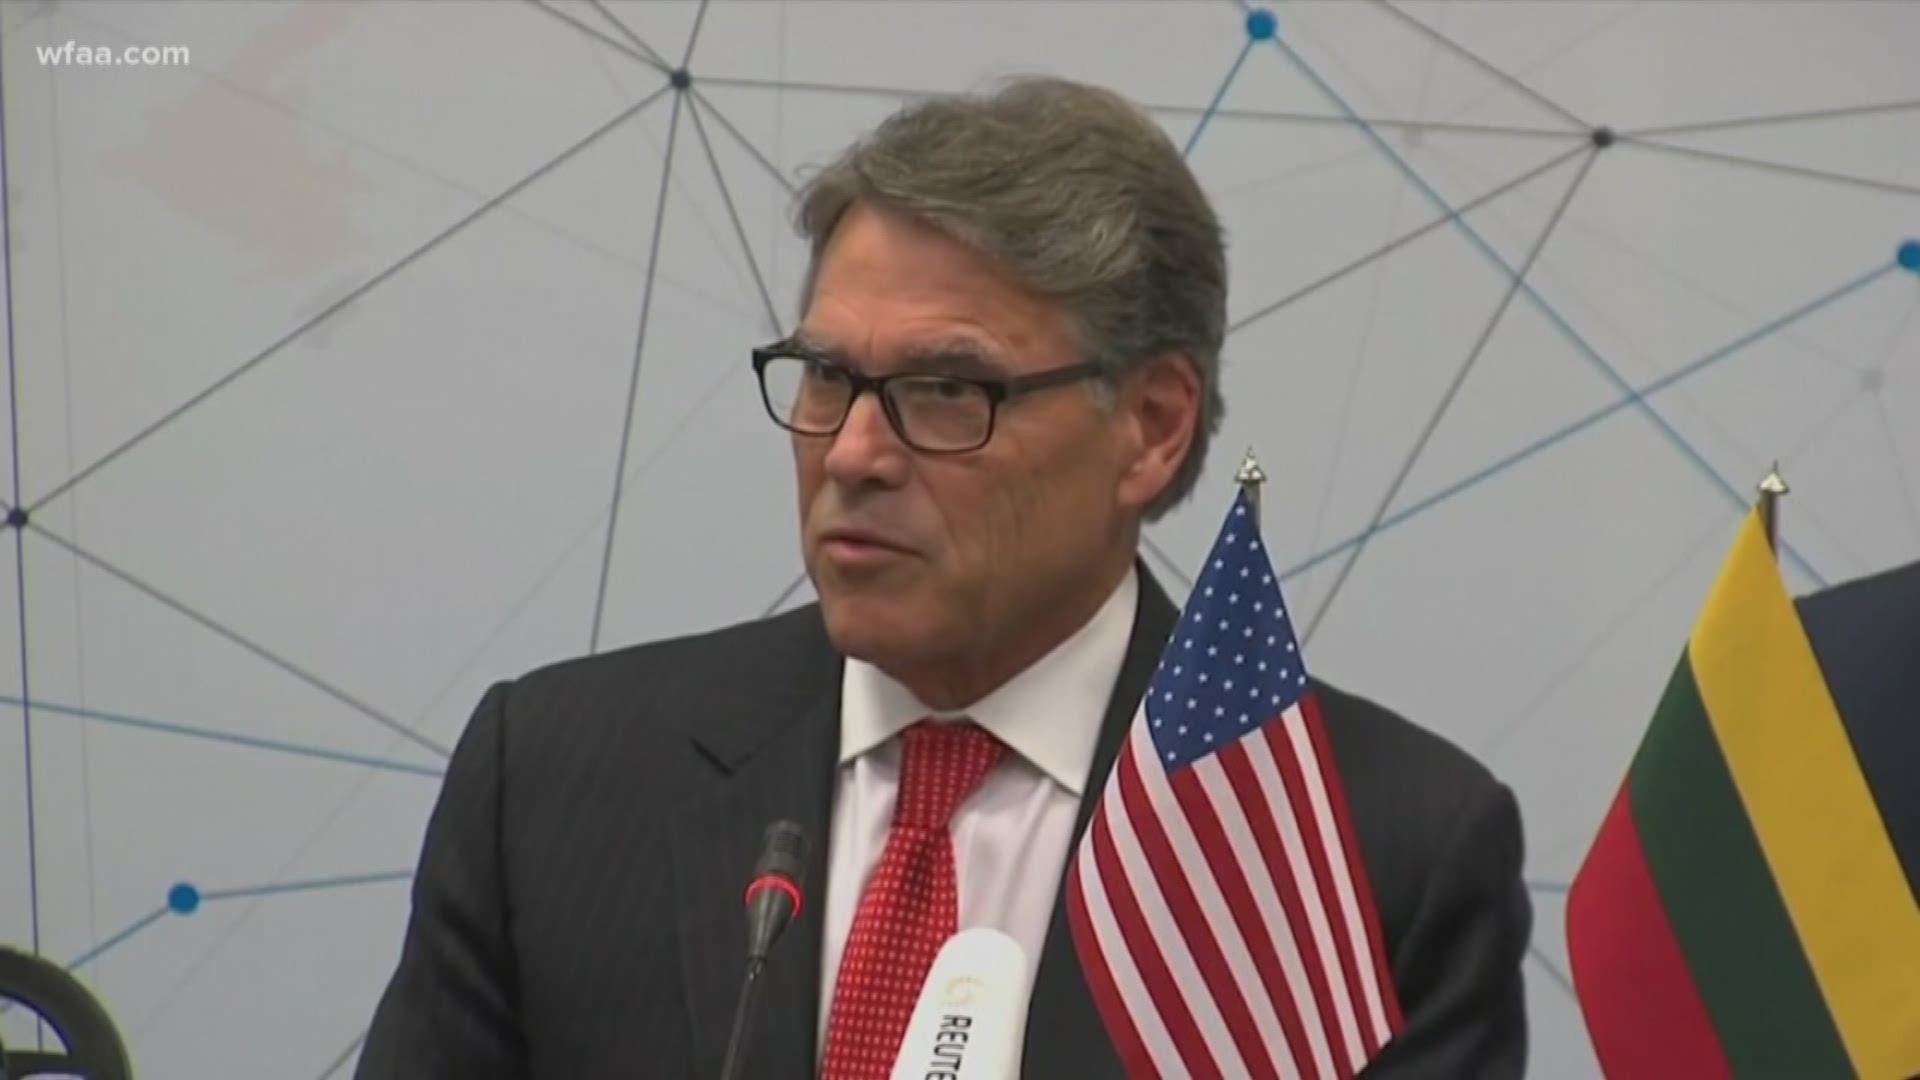 Perry “took the lead” in working with President Trump’s personal attorney, Ambassador Gordon Sondland said under oath.